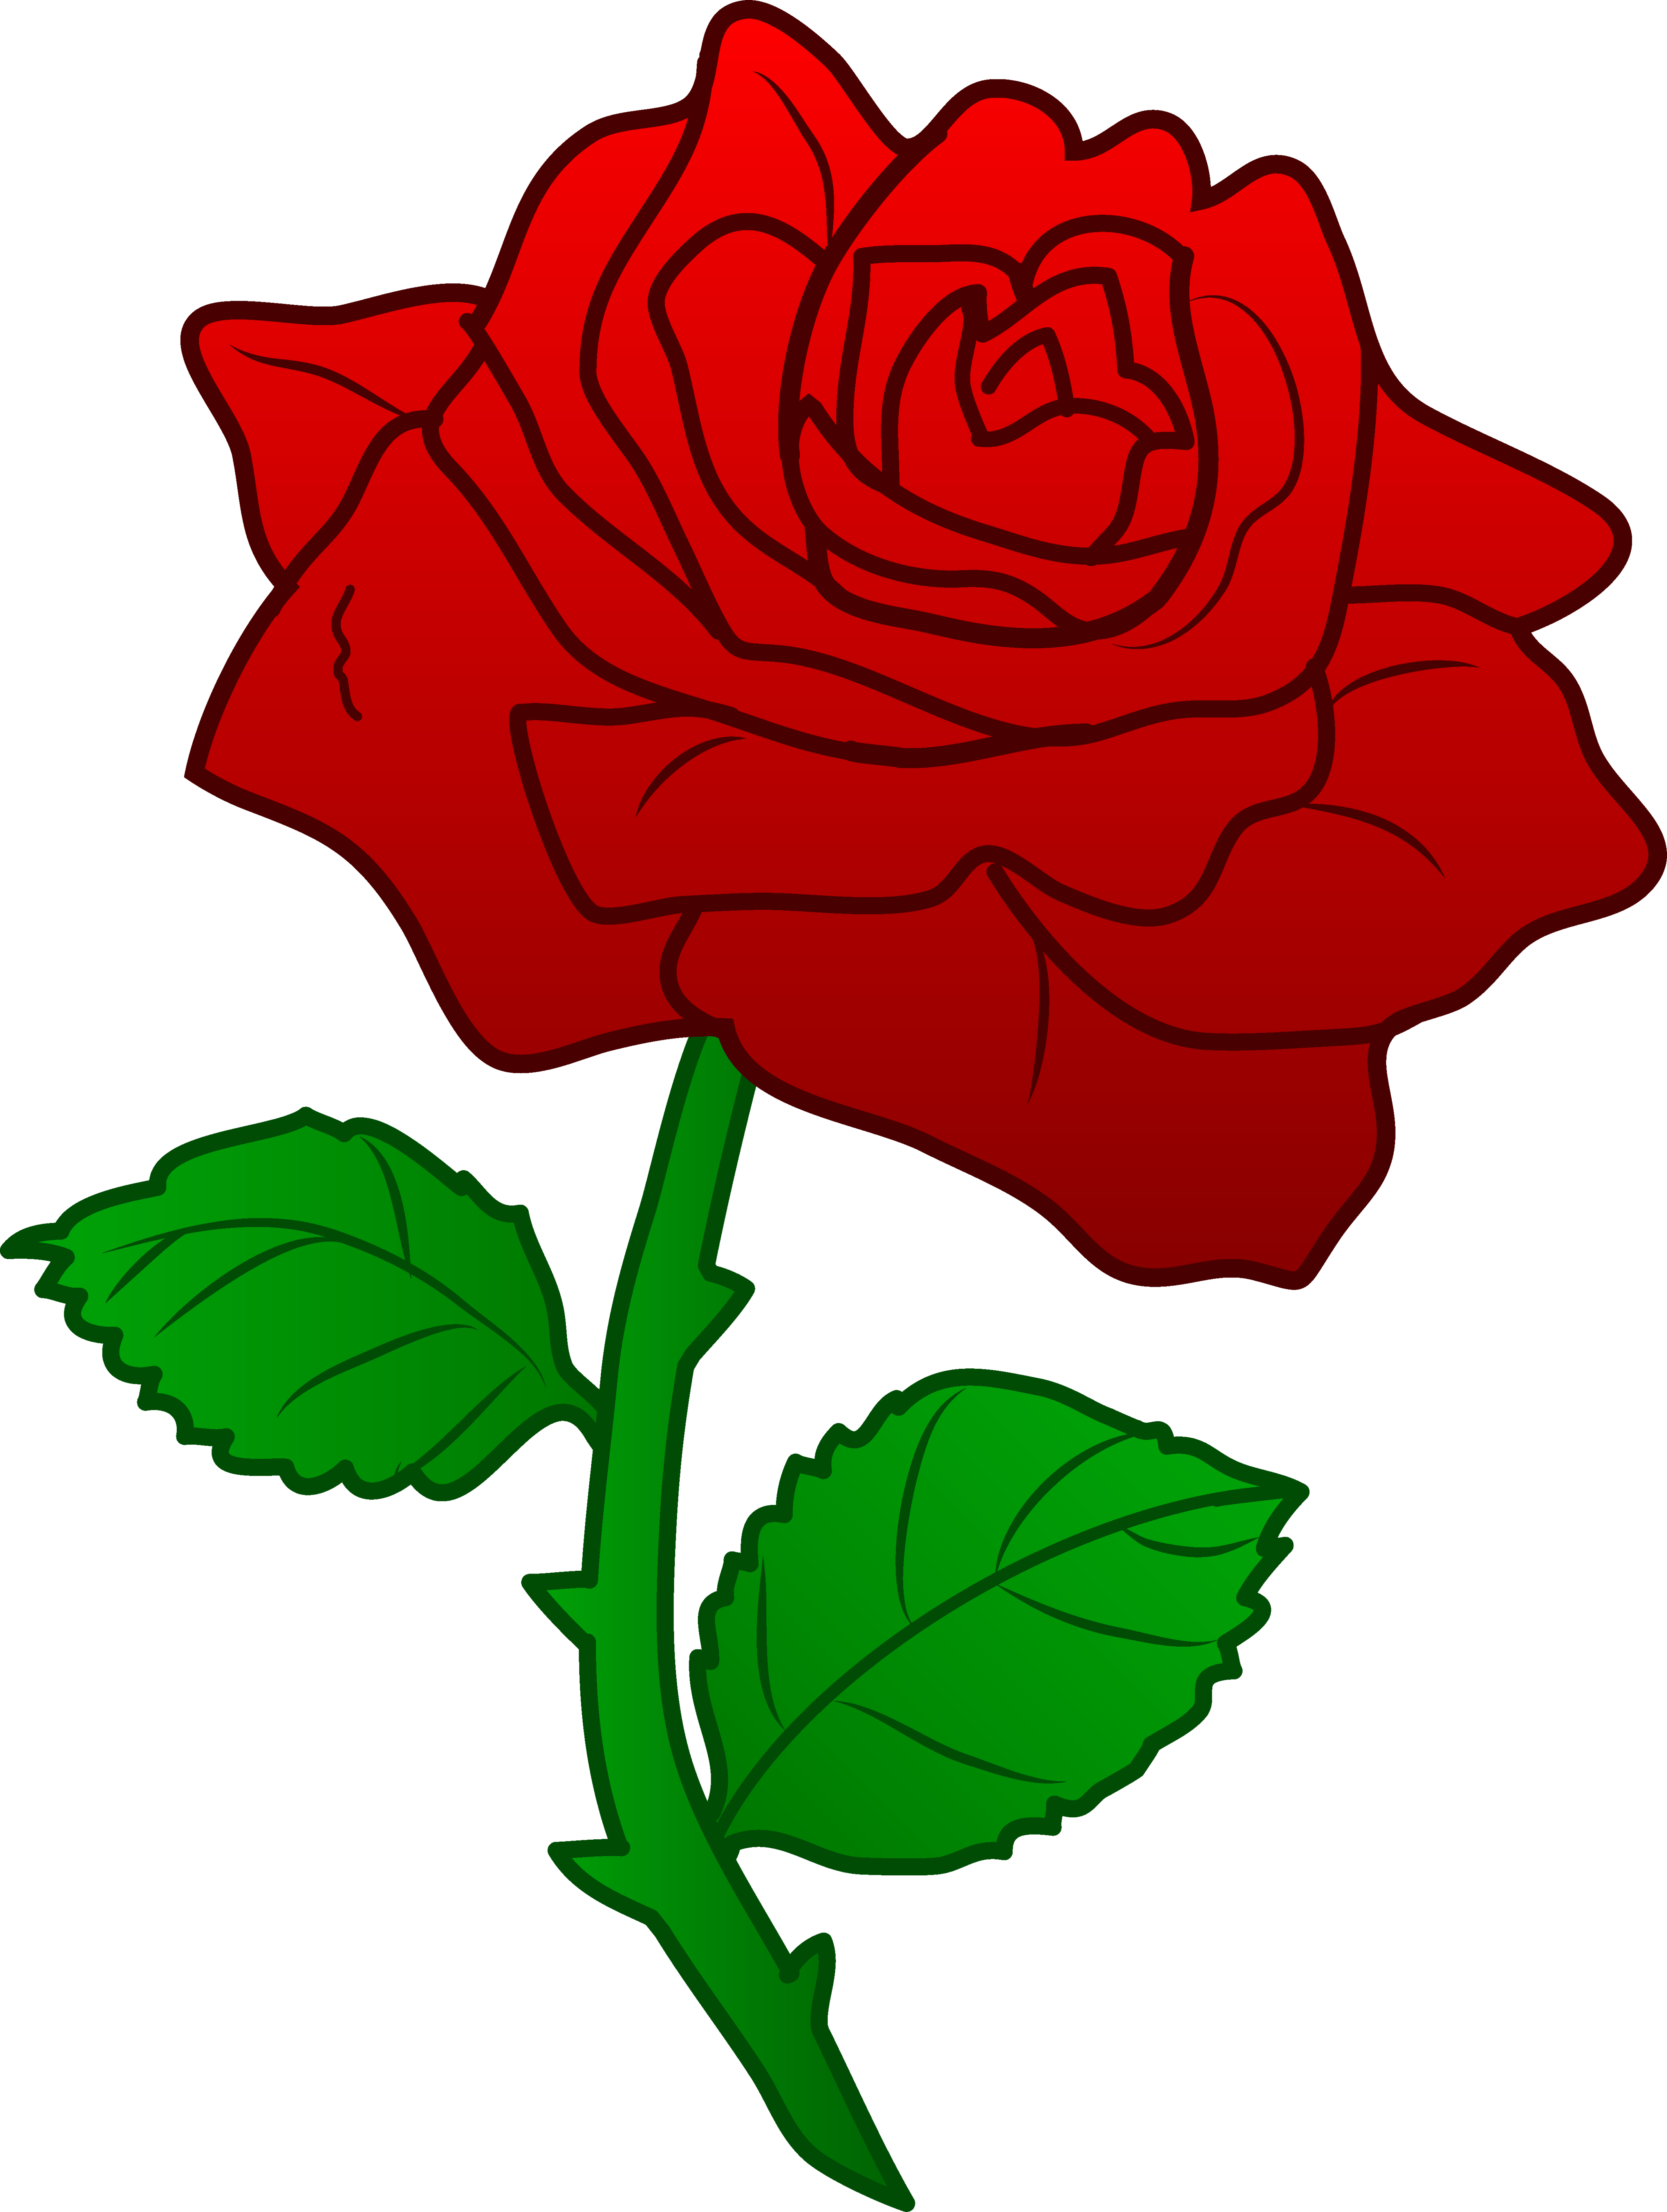 Single red rose clipart - Cli